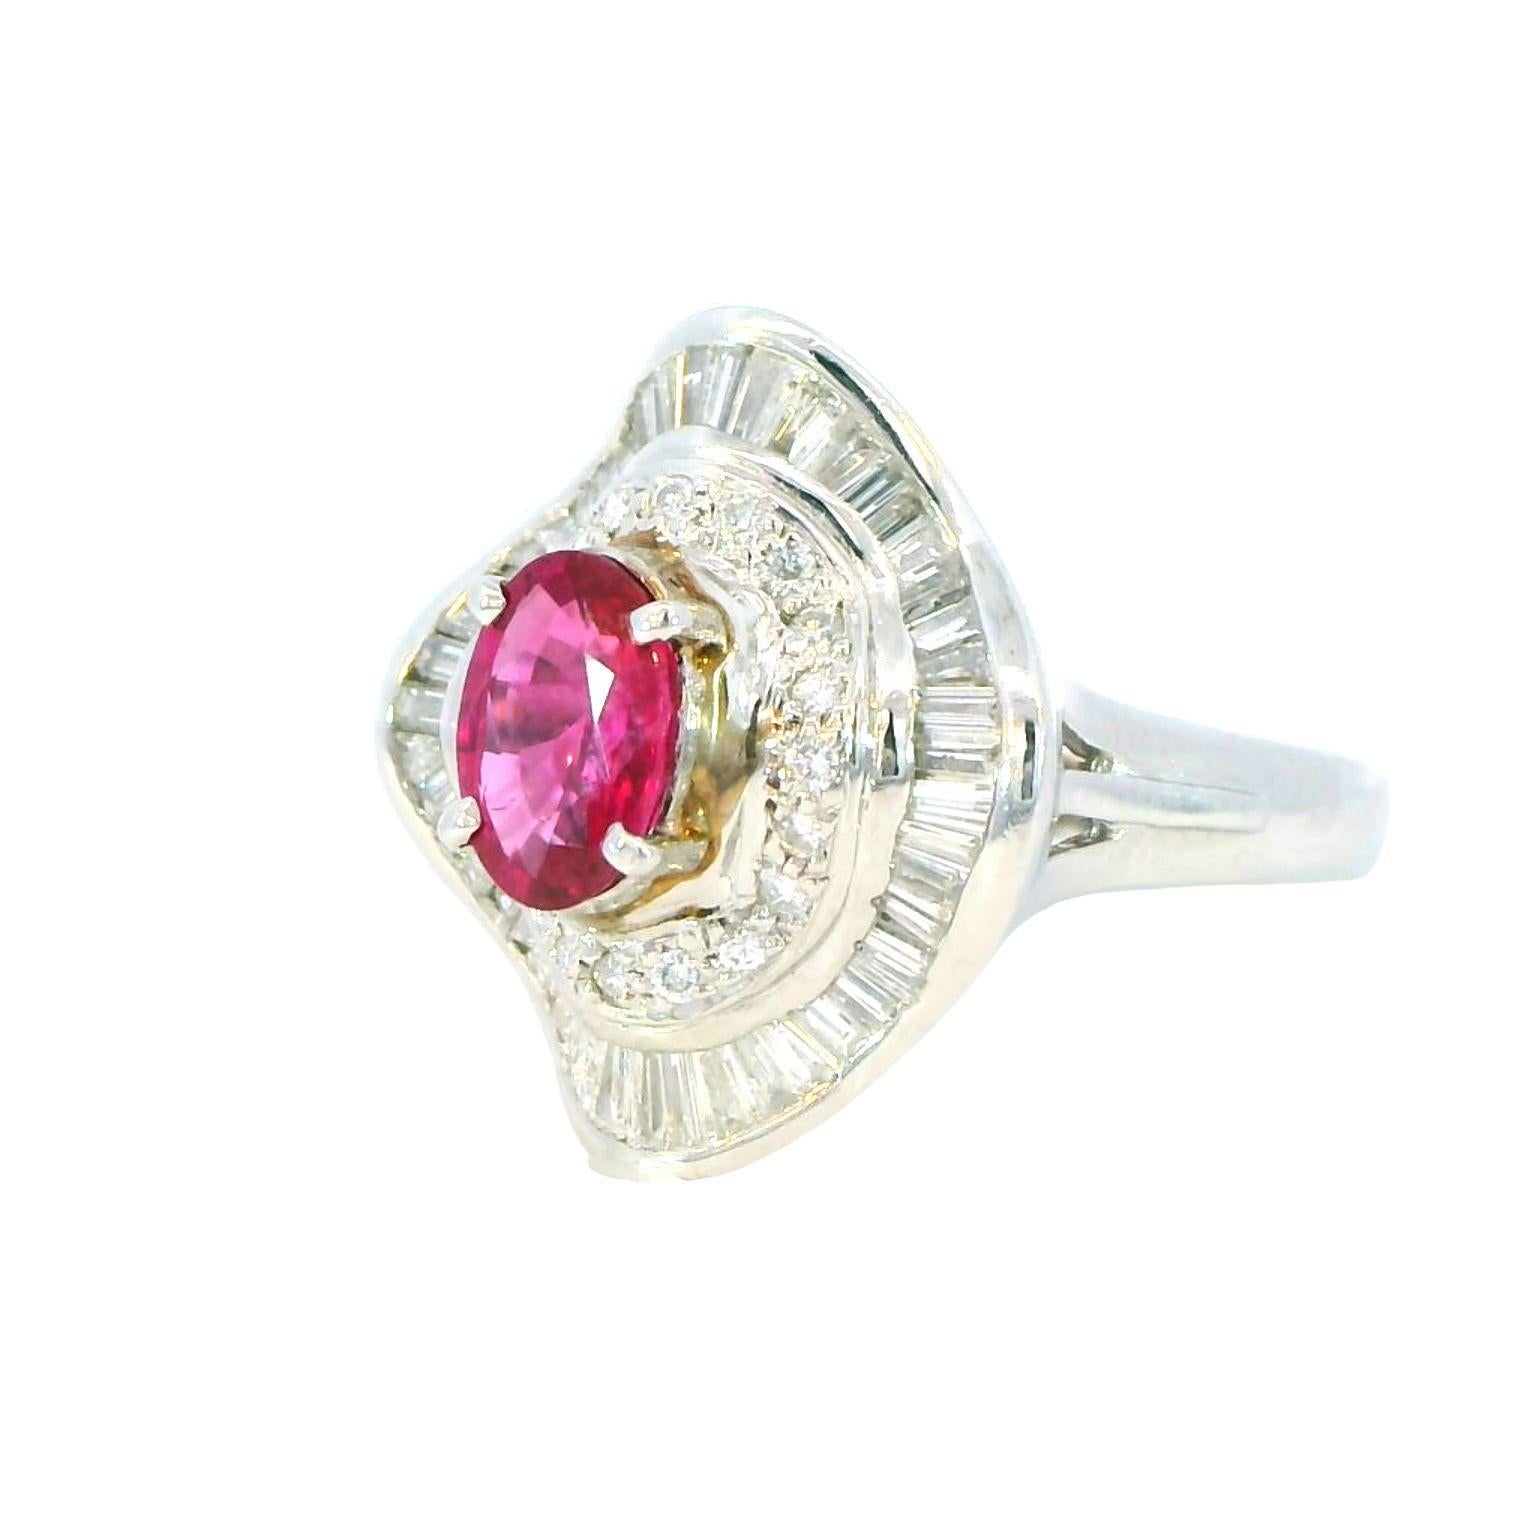 Baguette Cut 1.20 Carat Ruby and 1.00 Carat Diamond Ring For Sale